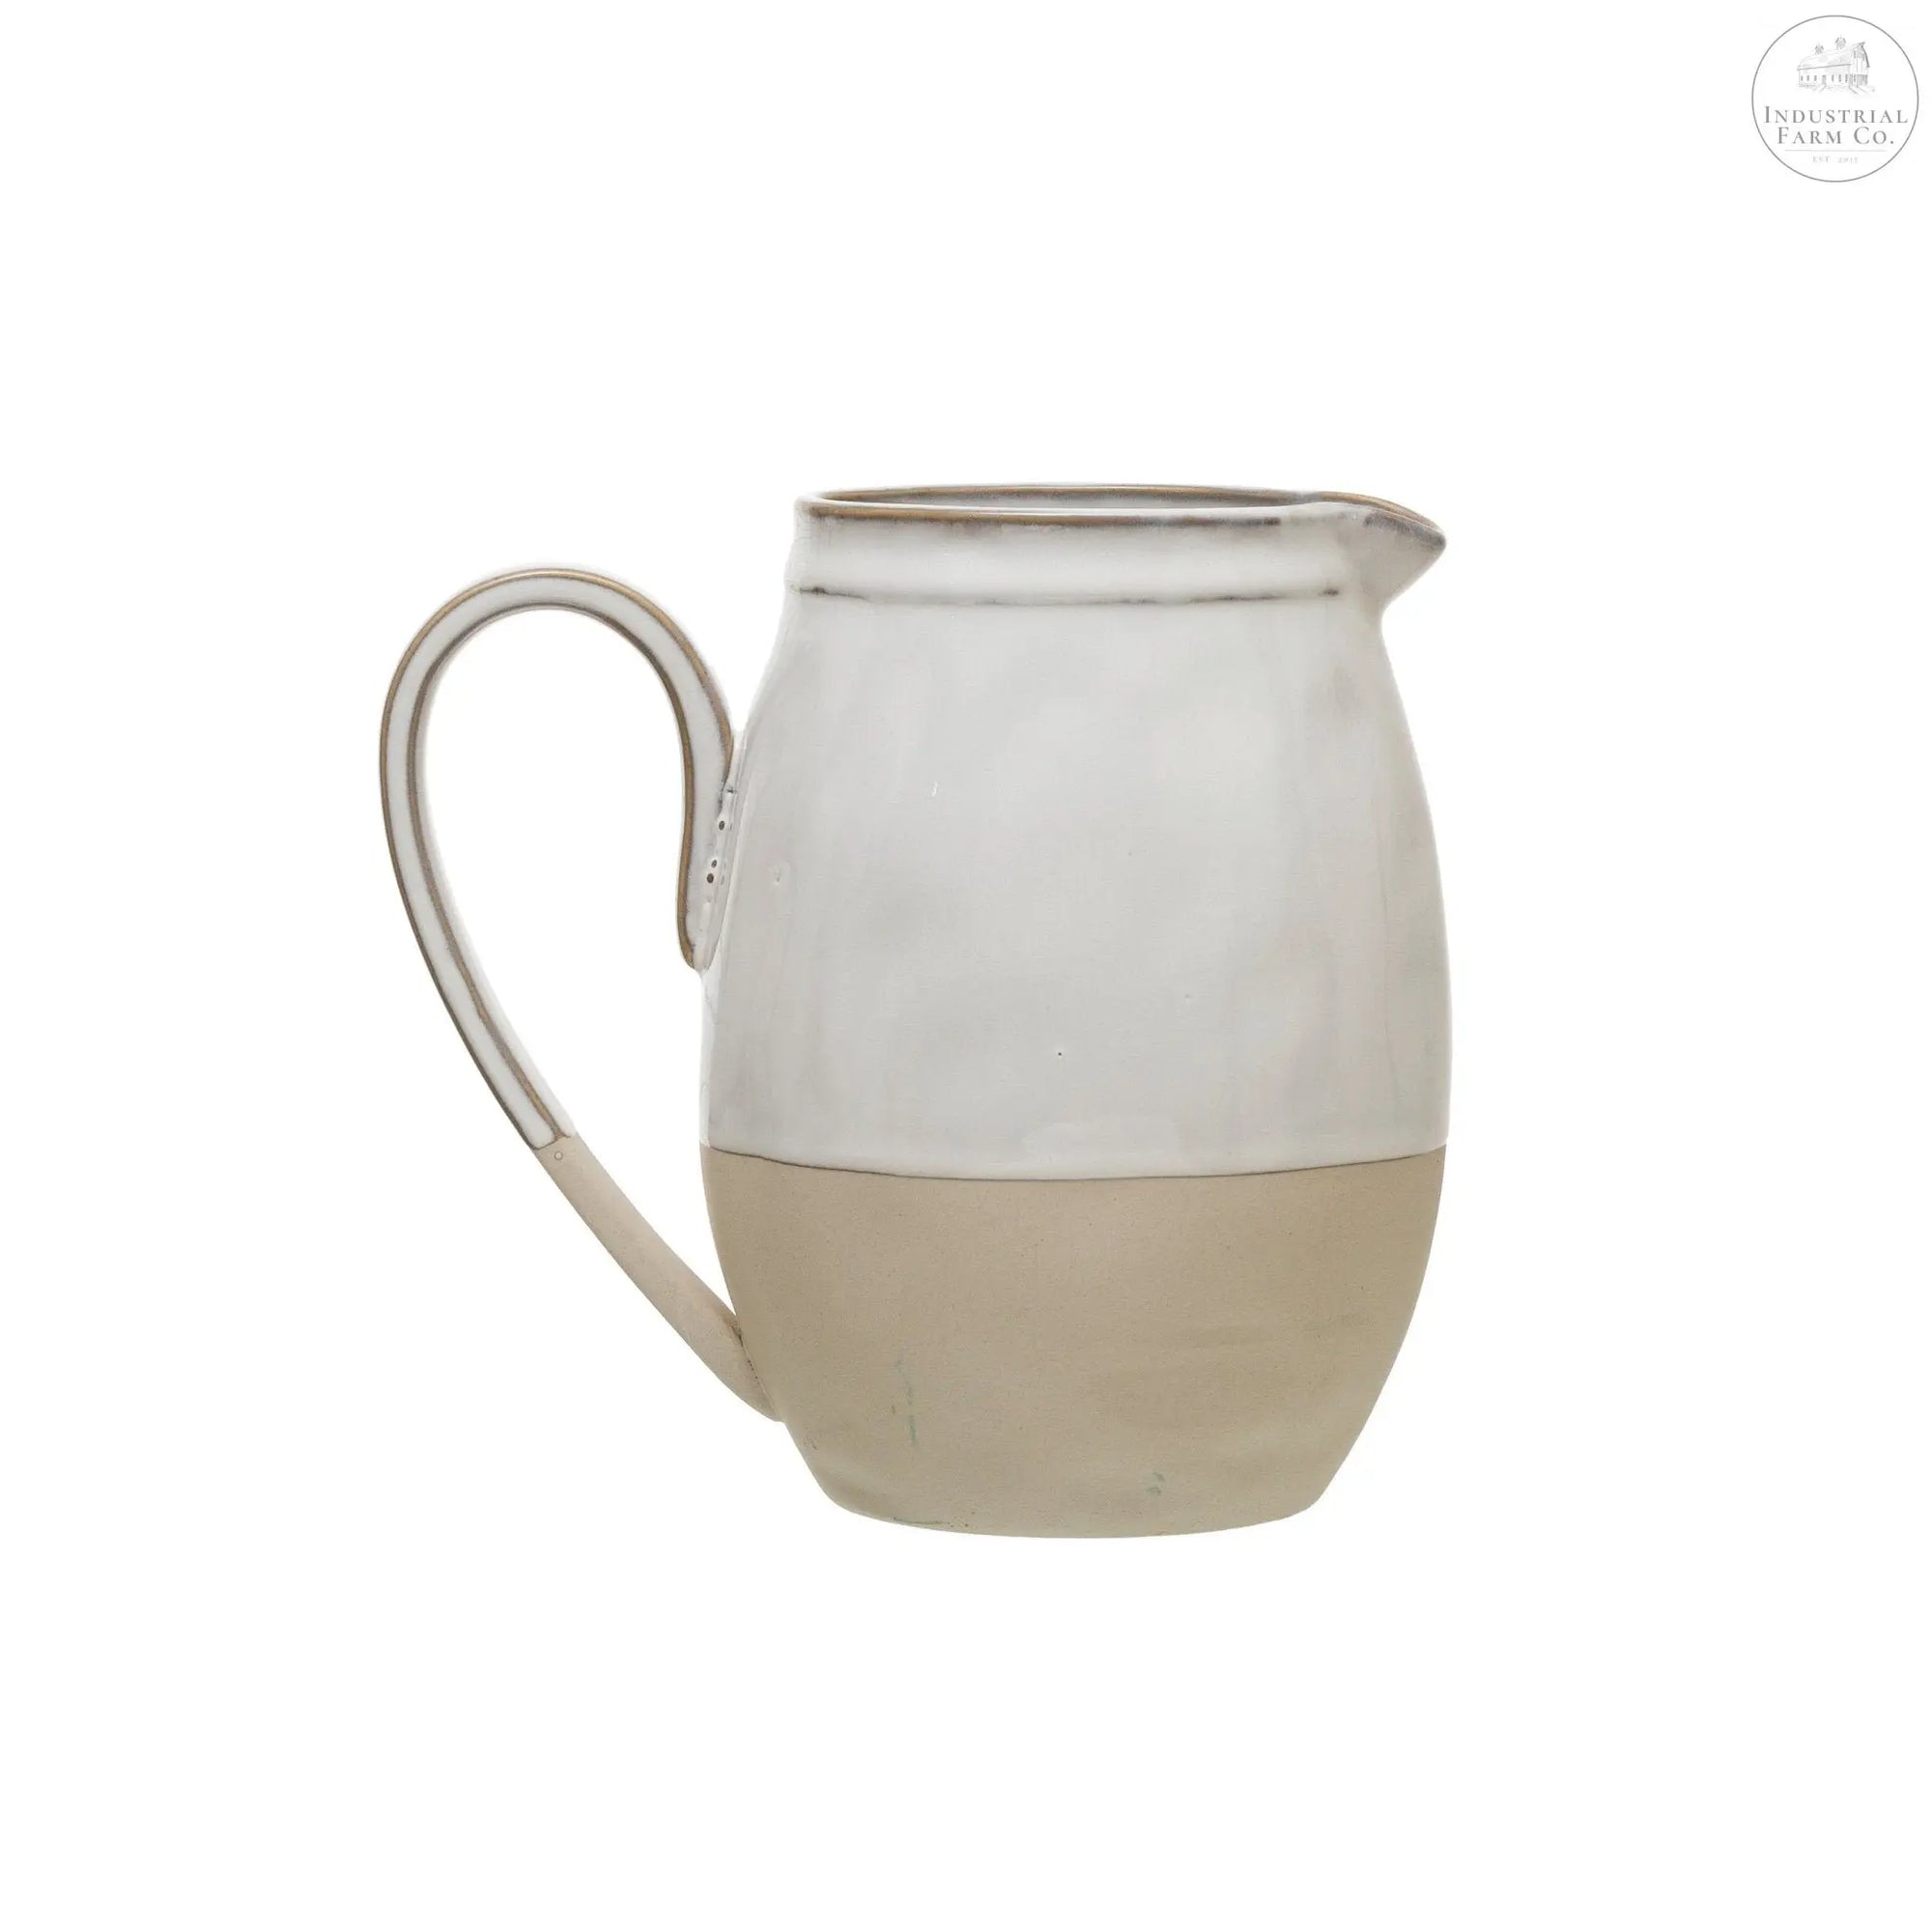 The Homestead Stoneware Pitcher Serving Pitchers & Carafes    | Industrial Farm Co